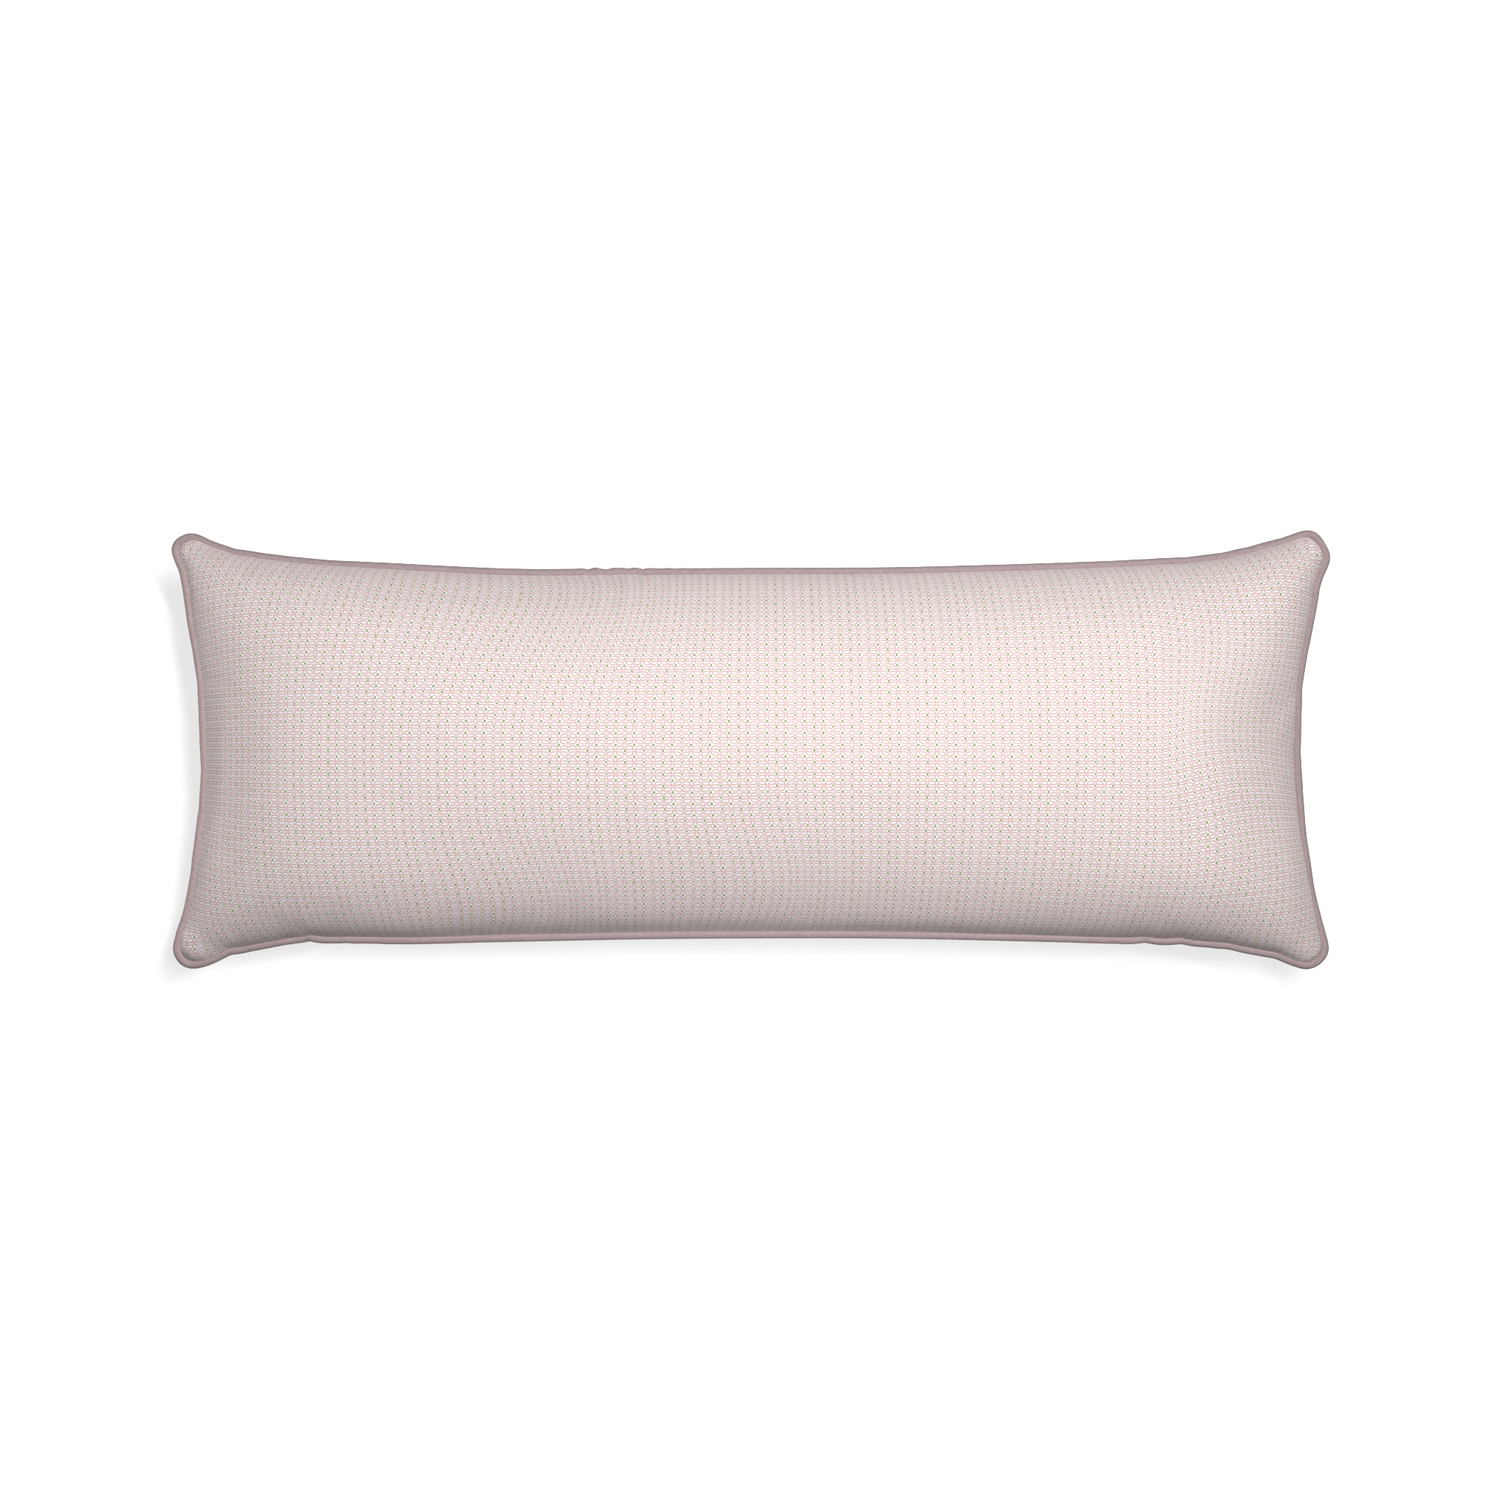 Xl-lumbar loomi pink custom pink geometricpillow with orchid piping on white background